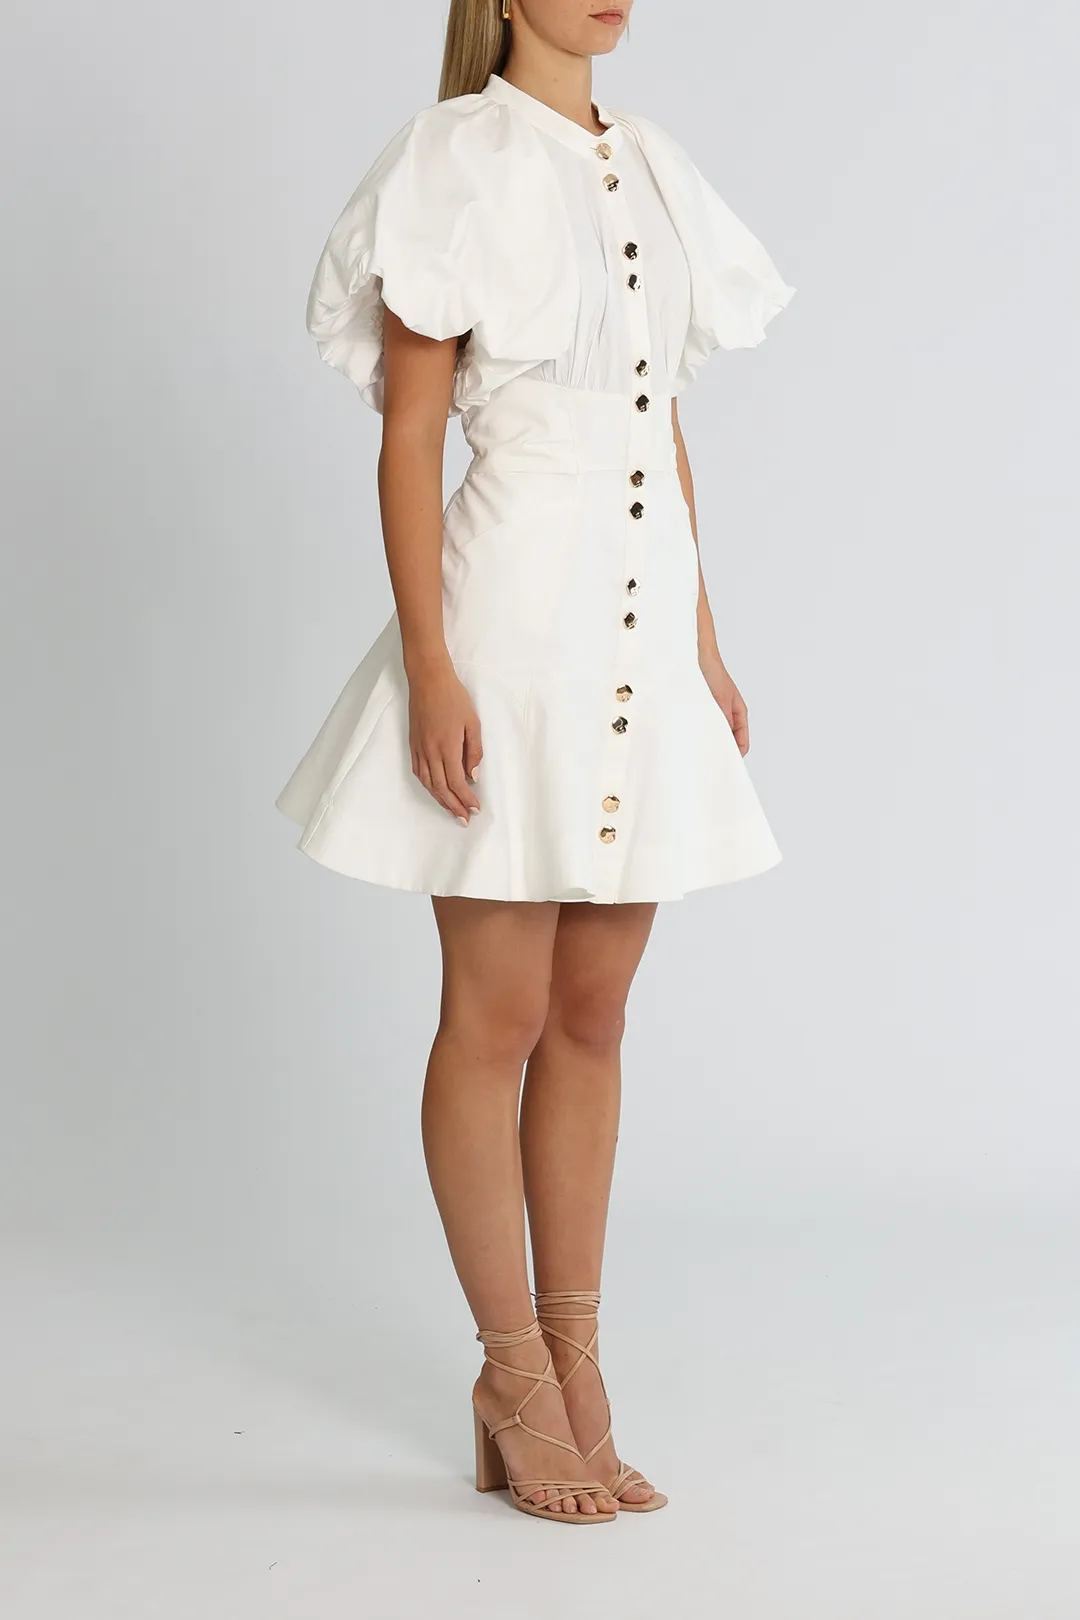 Rent Dalbury Dress in white for formal events.